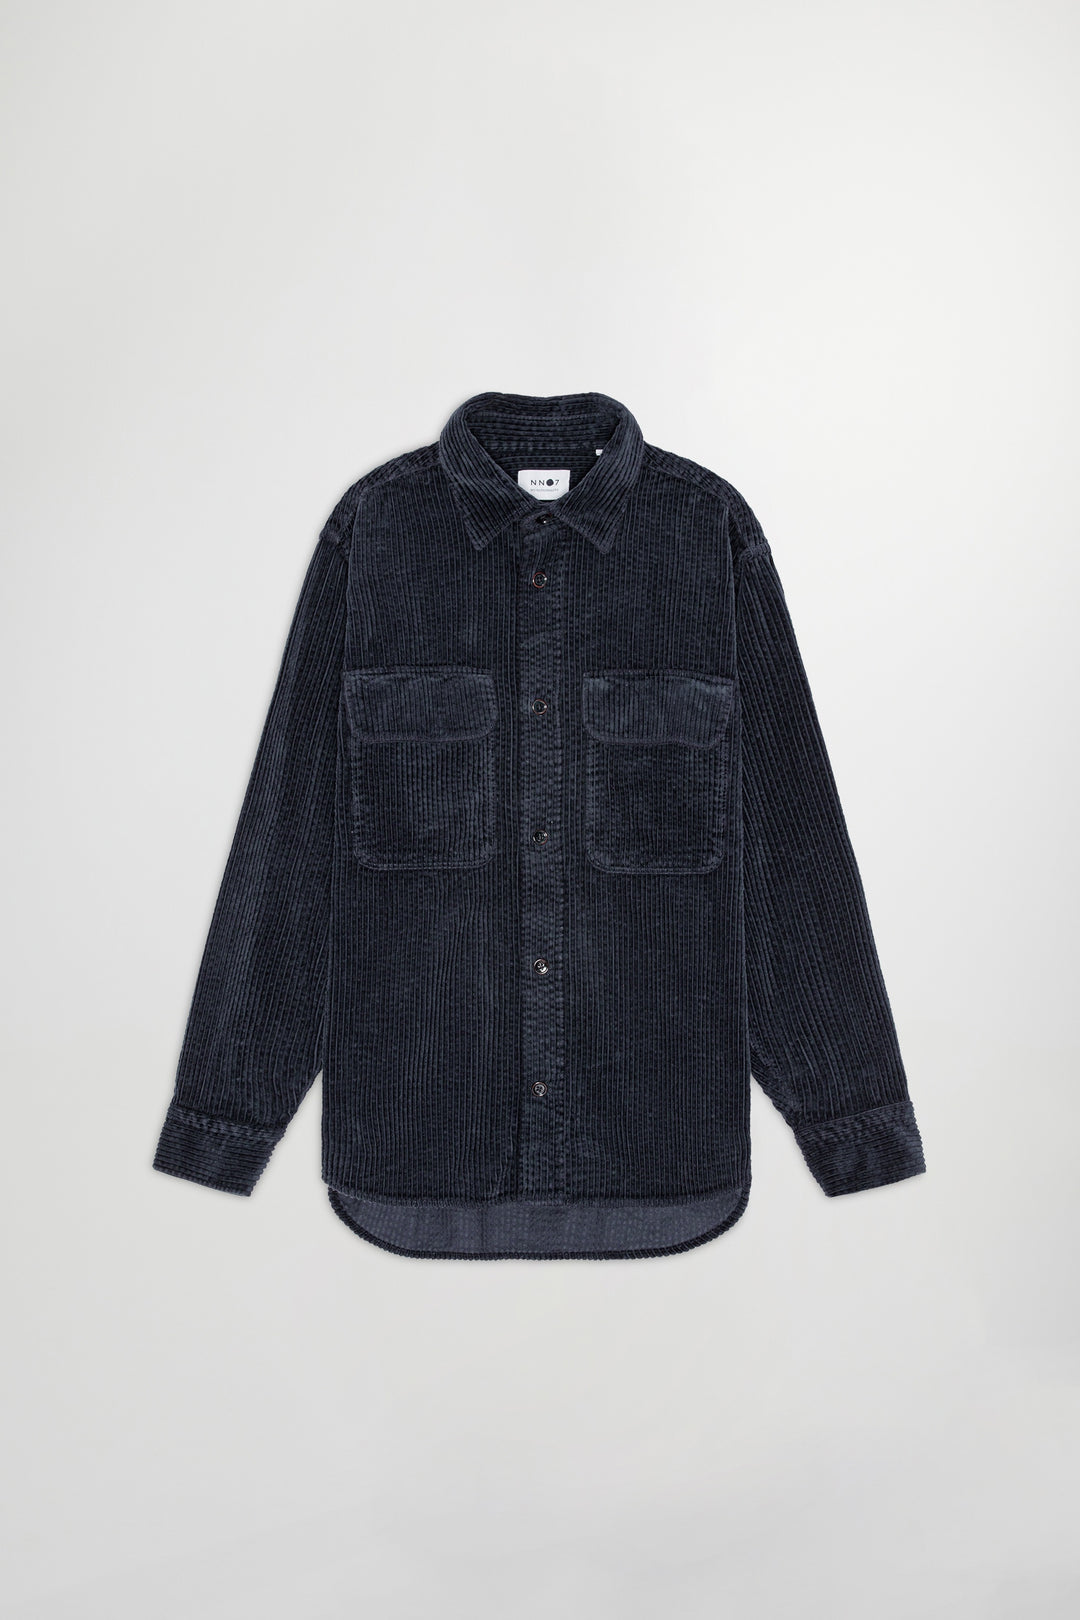 NN07 Folmer 1725 Classic Cord Overshirt in Navy Blue | Buster McGee